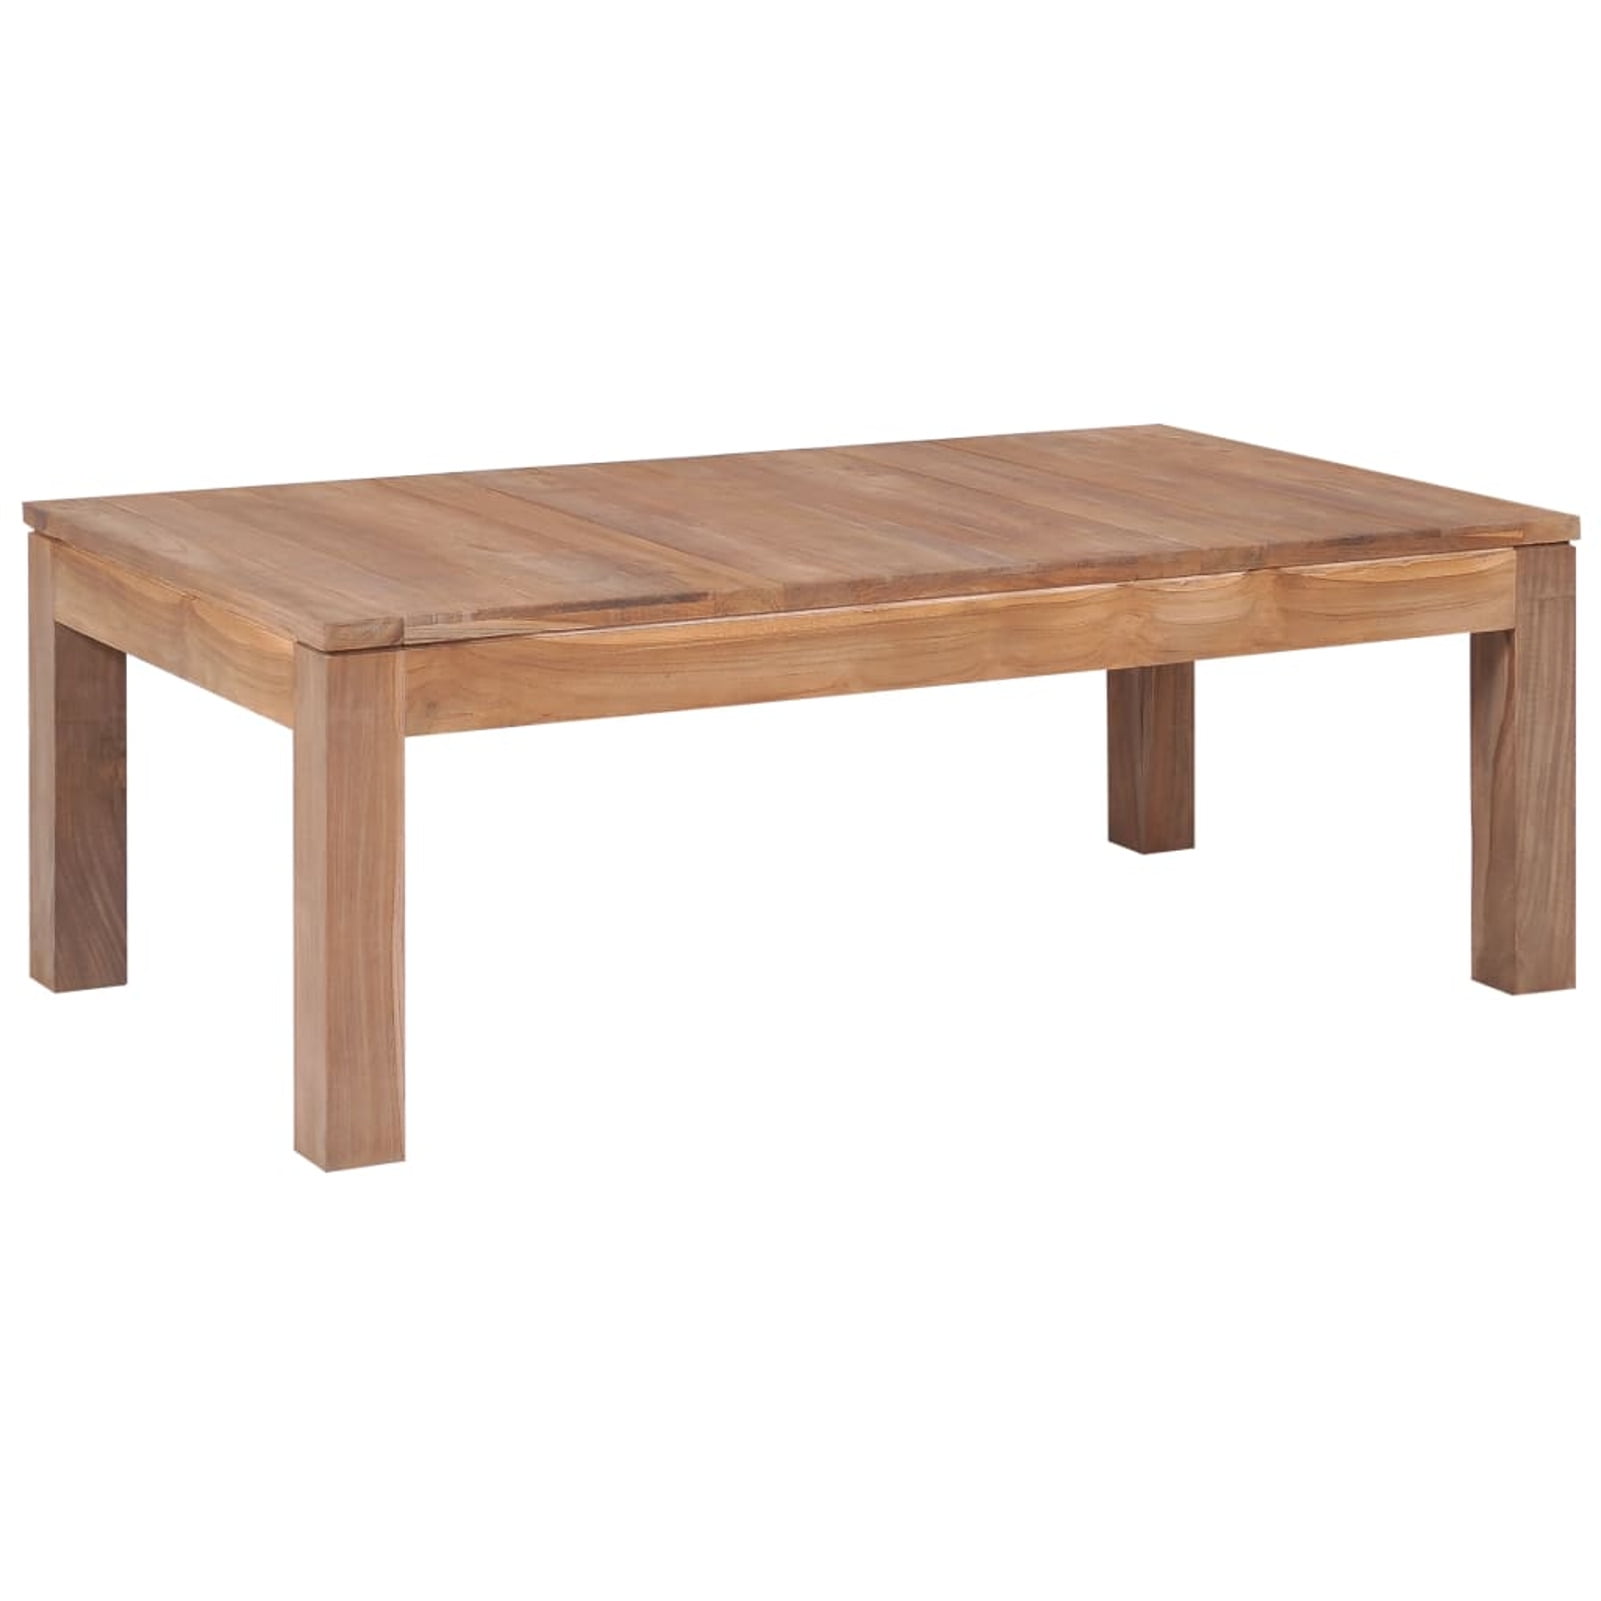 Details about   Natural Coffee Table with Storage Shelf for Living Room US Stock 